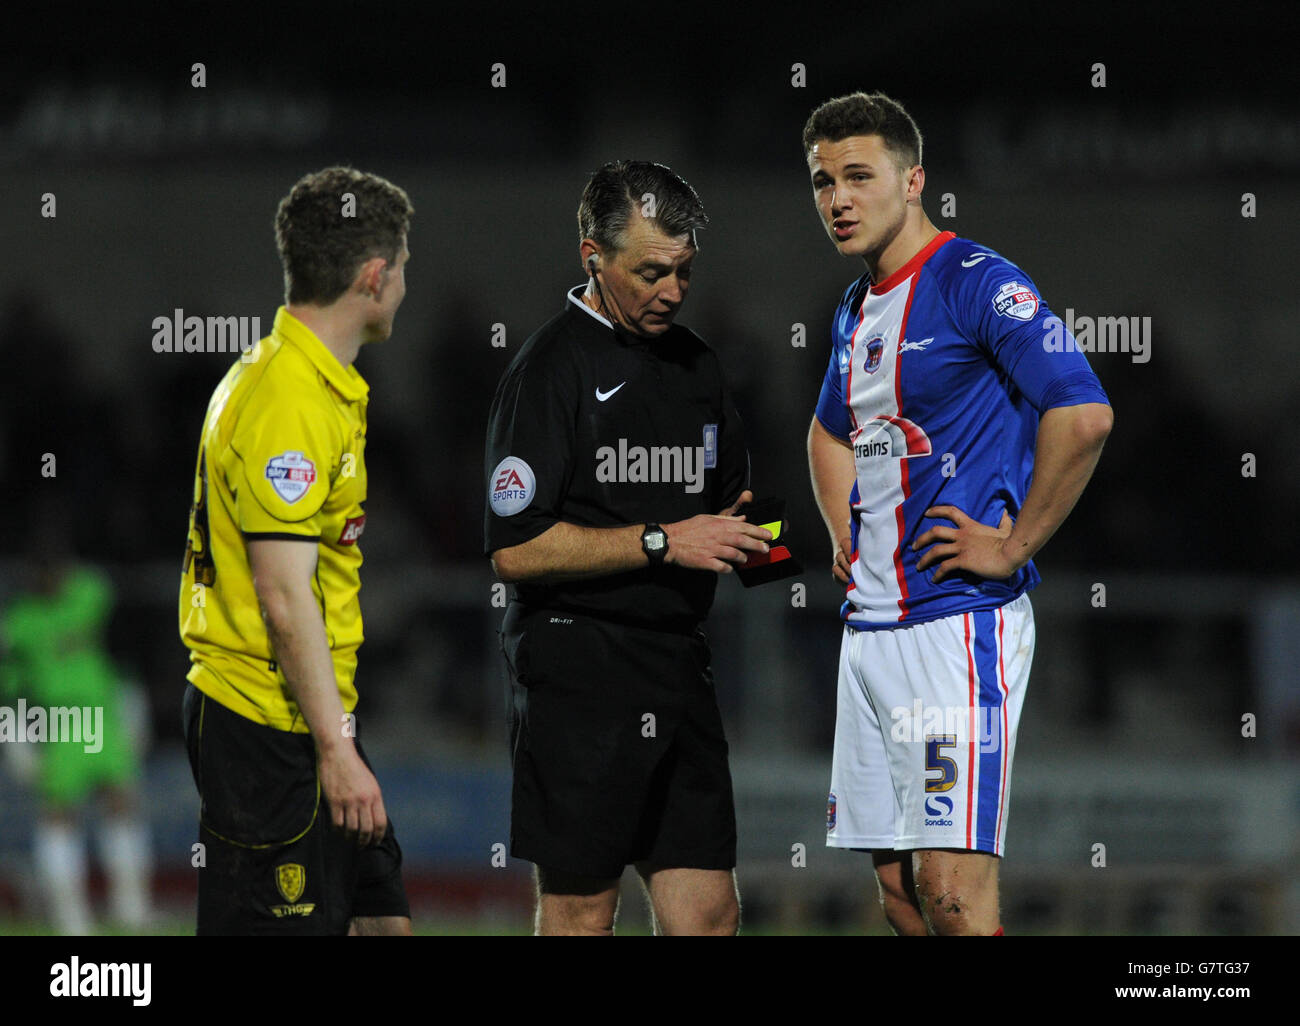 Carlisle's Nathan Buddle (right) receives a yellow card for a tackle on Burton Albion's Matty Palmer during the Sky Bet League Two match at the Pirelli Stadium, Burton. Stock Photo